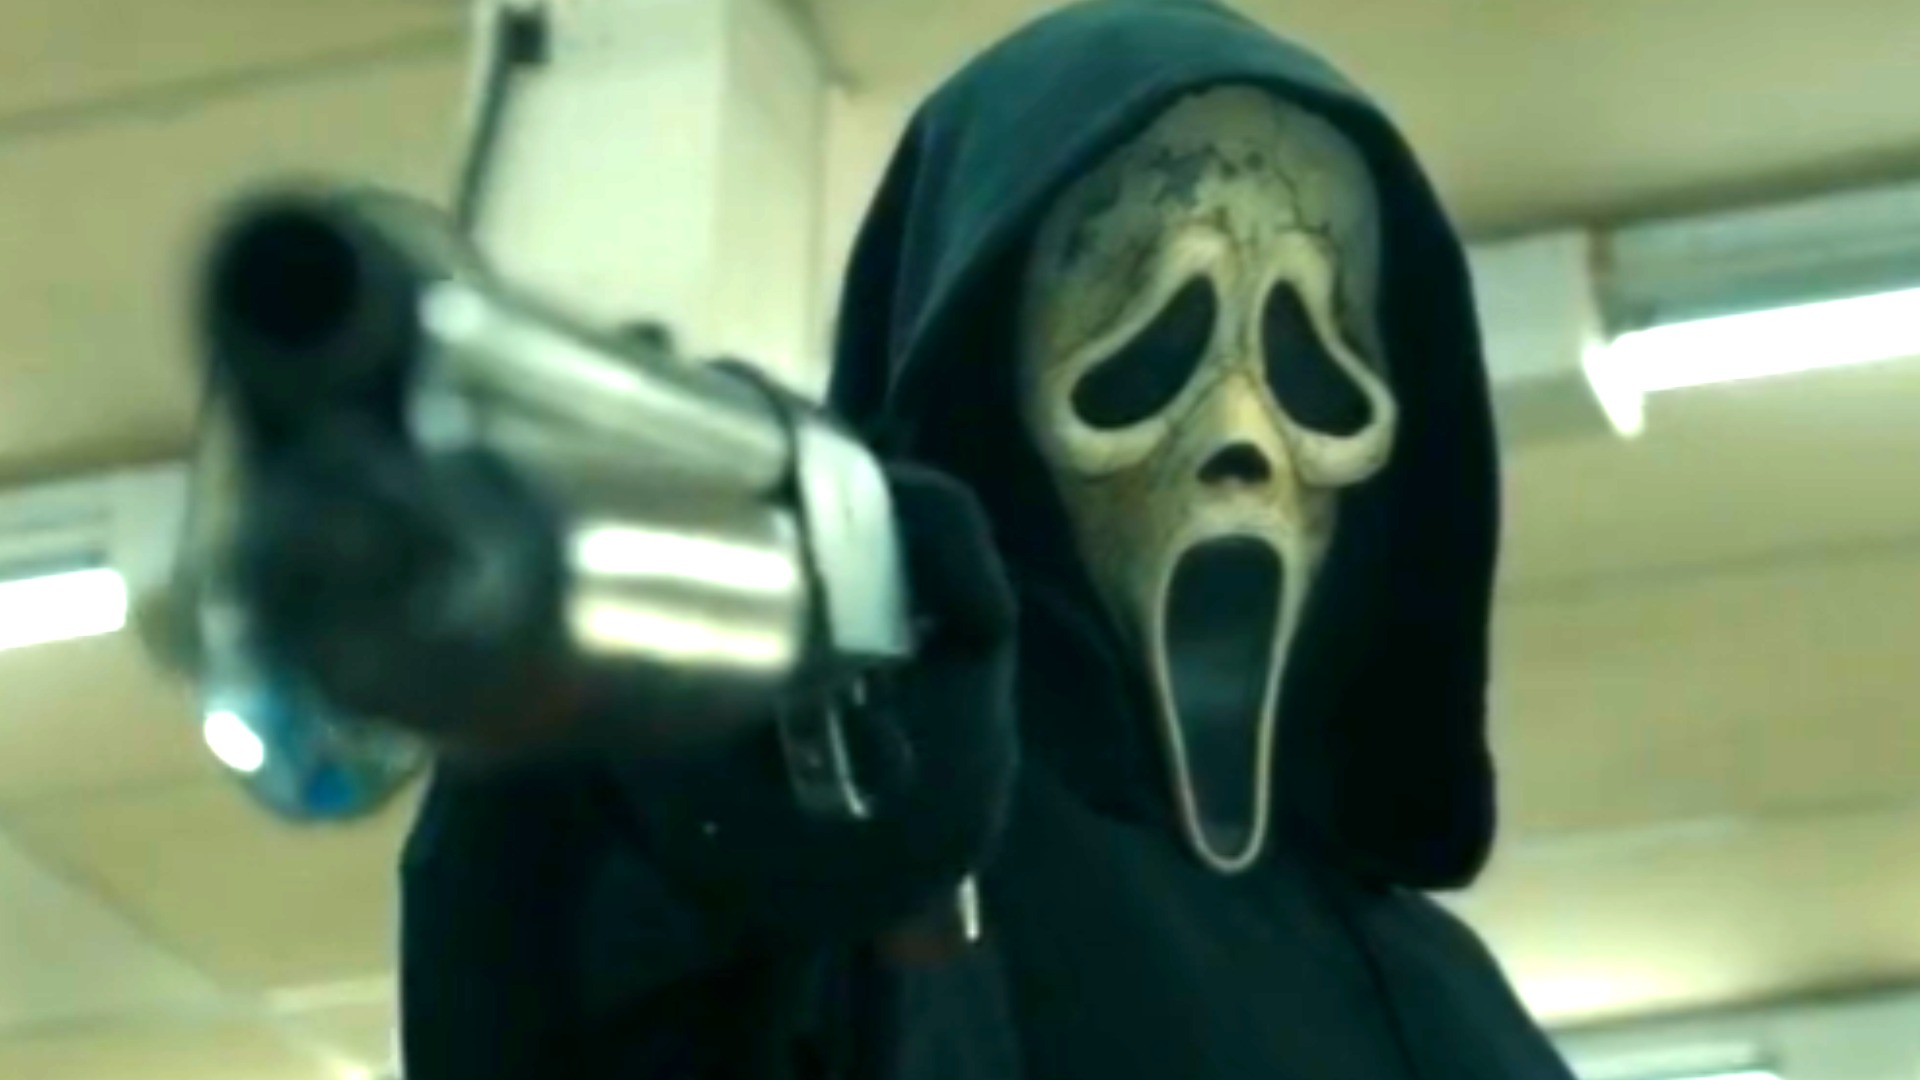 Scream VI: Official Clip - Sam Becomes Ghostface - Trailers & Videos -  Rotten Tomatoes